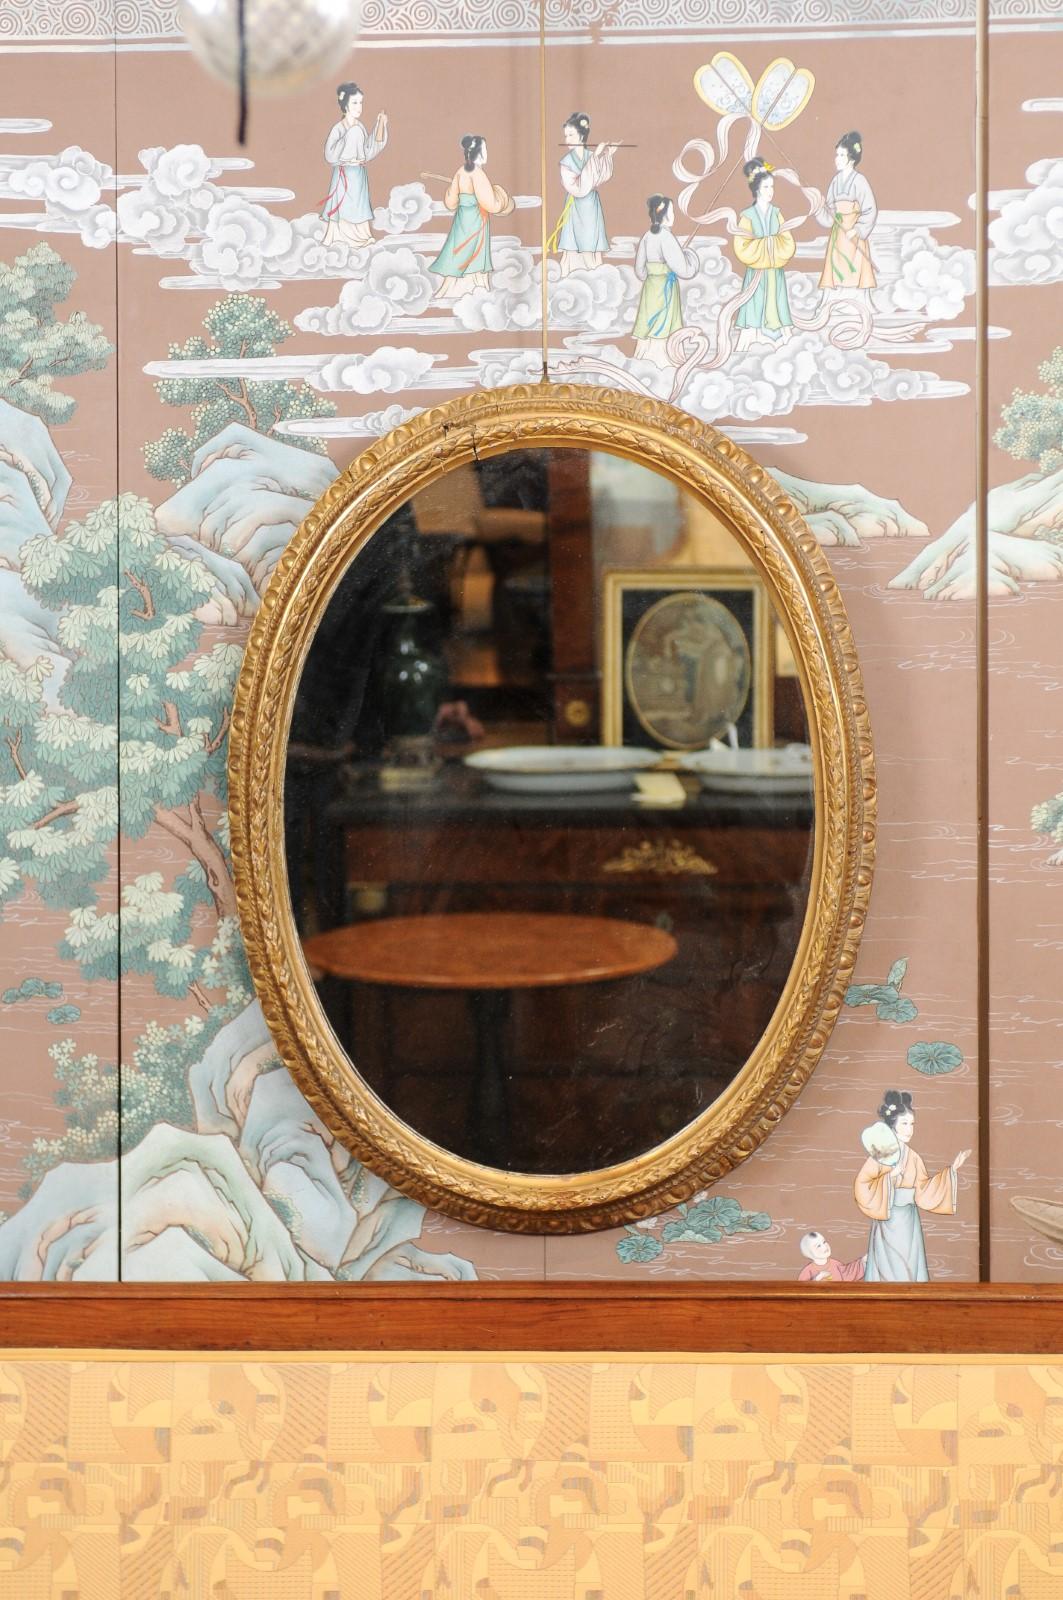 A Louis XVI oval giltwood mirror with egg-and-dart, roping and laurel foliage detail on mirror frame. The mirror dating from the late 18th century.